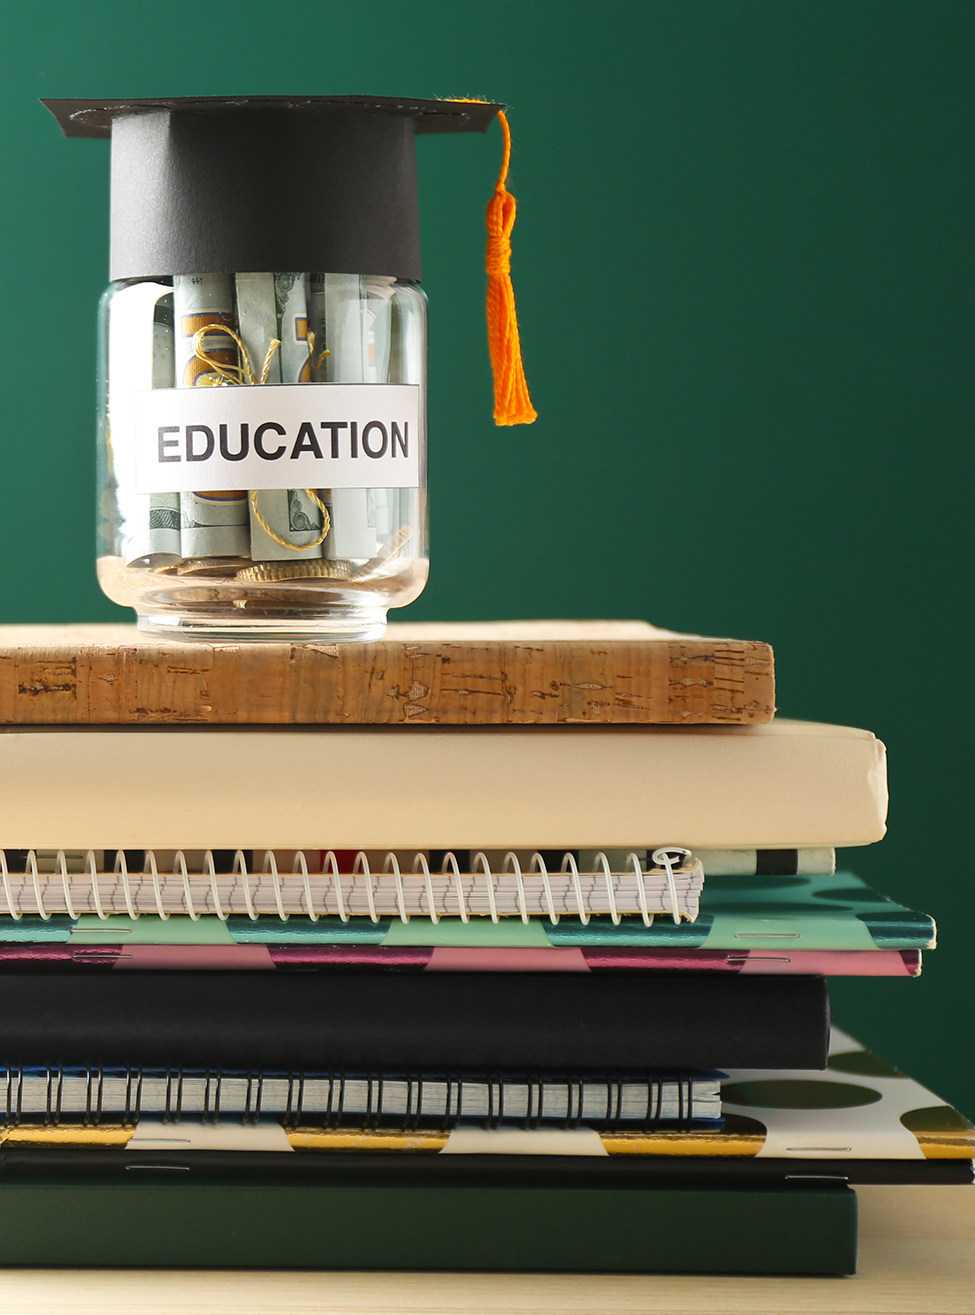 School supplies and glass jar with money for education on wooden table against green background